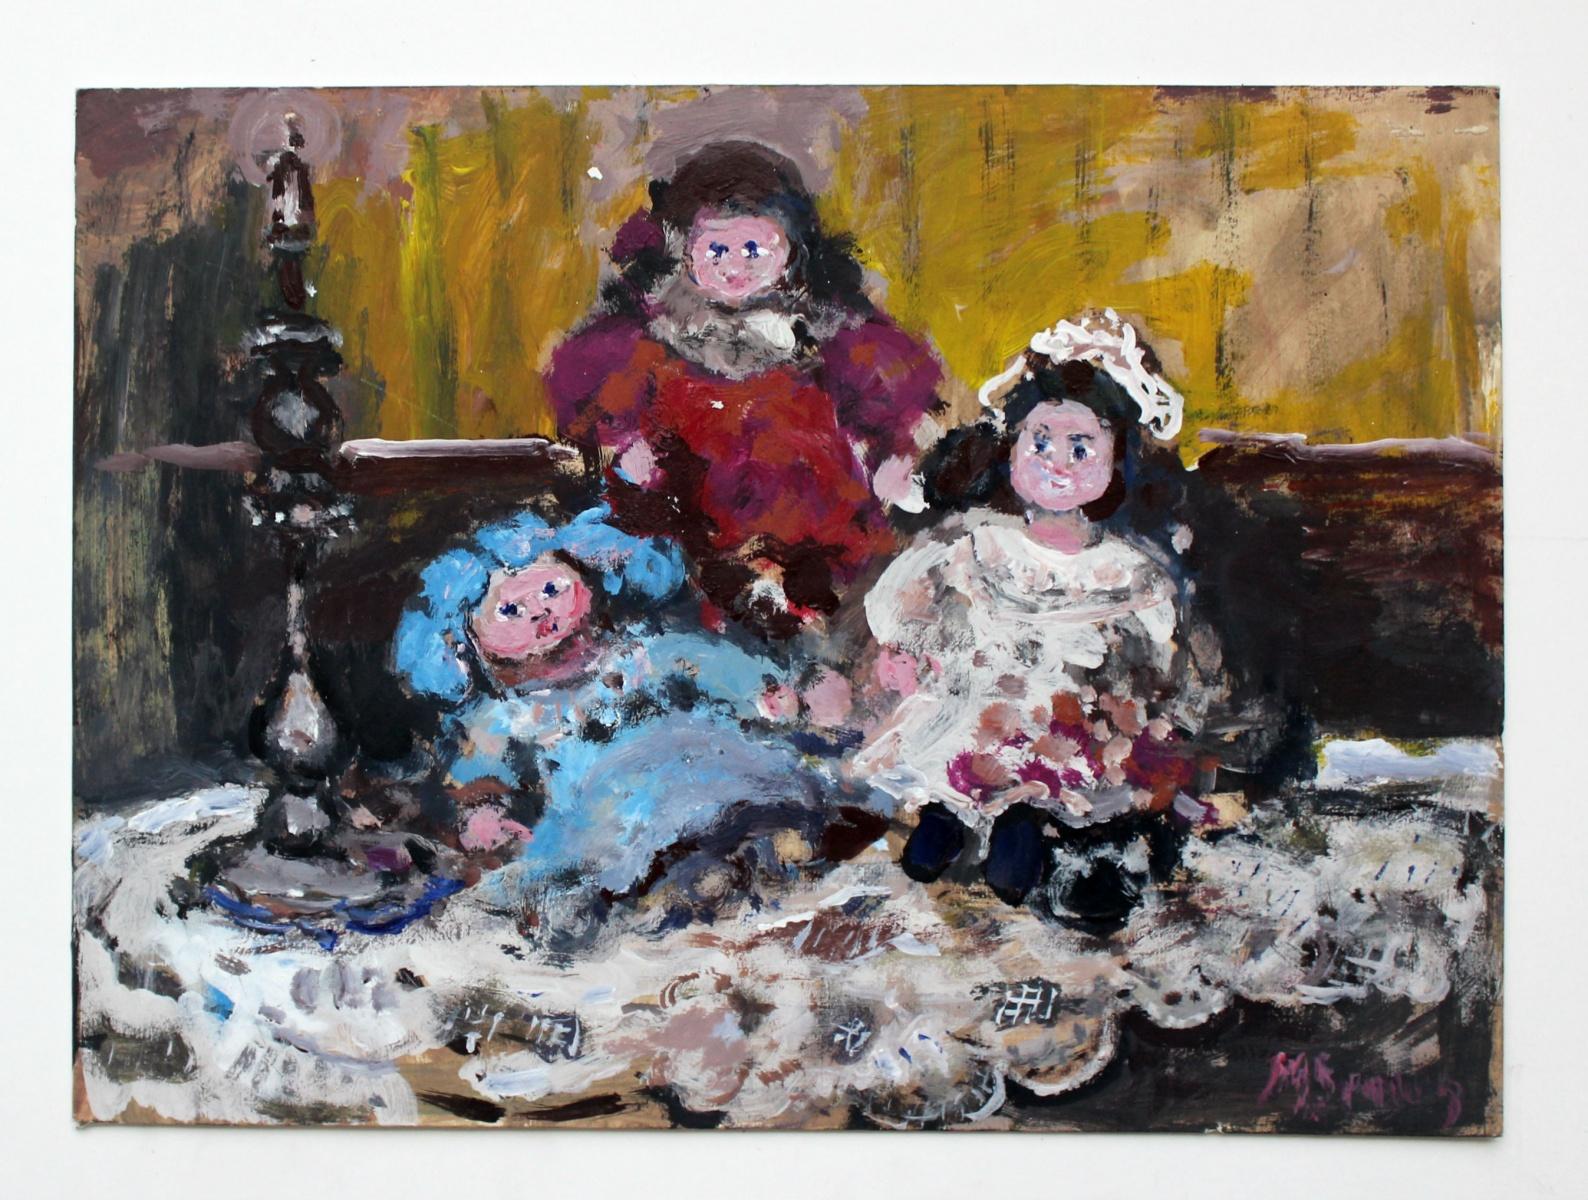 Dolls - 21 century, Oil painting, Figurative, Grey tones, Still life - Painting by Magdalena Spasowicz